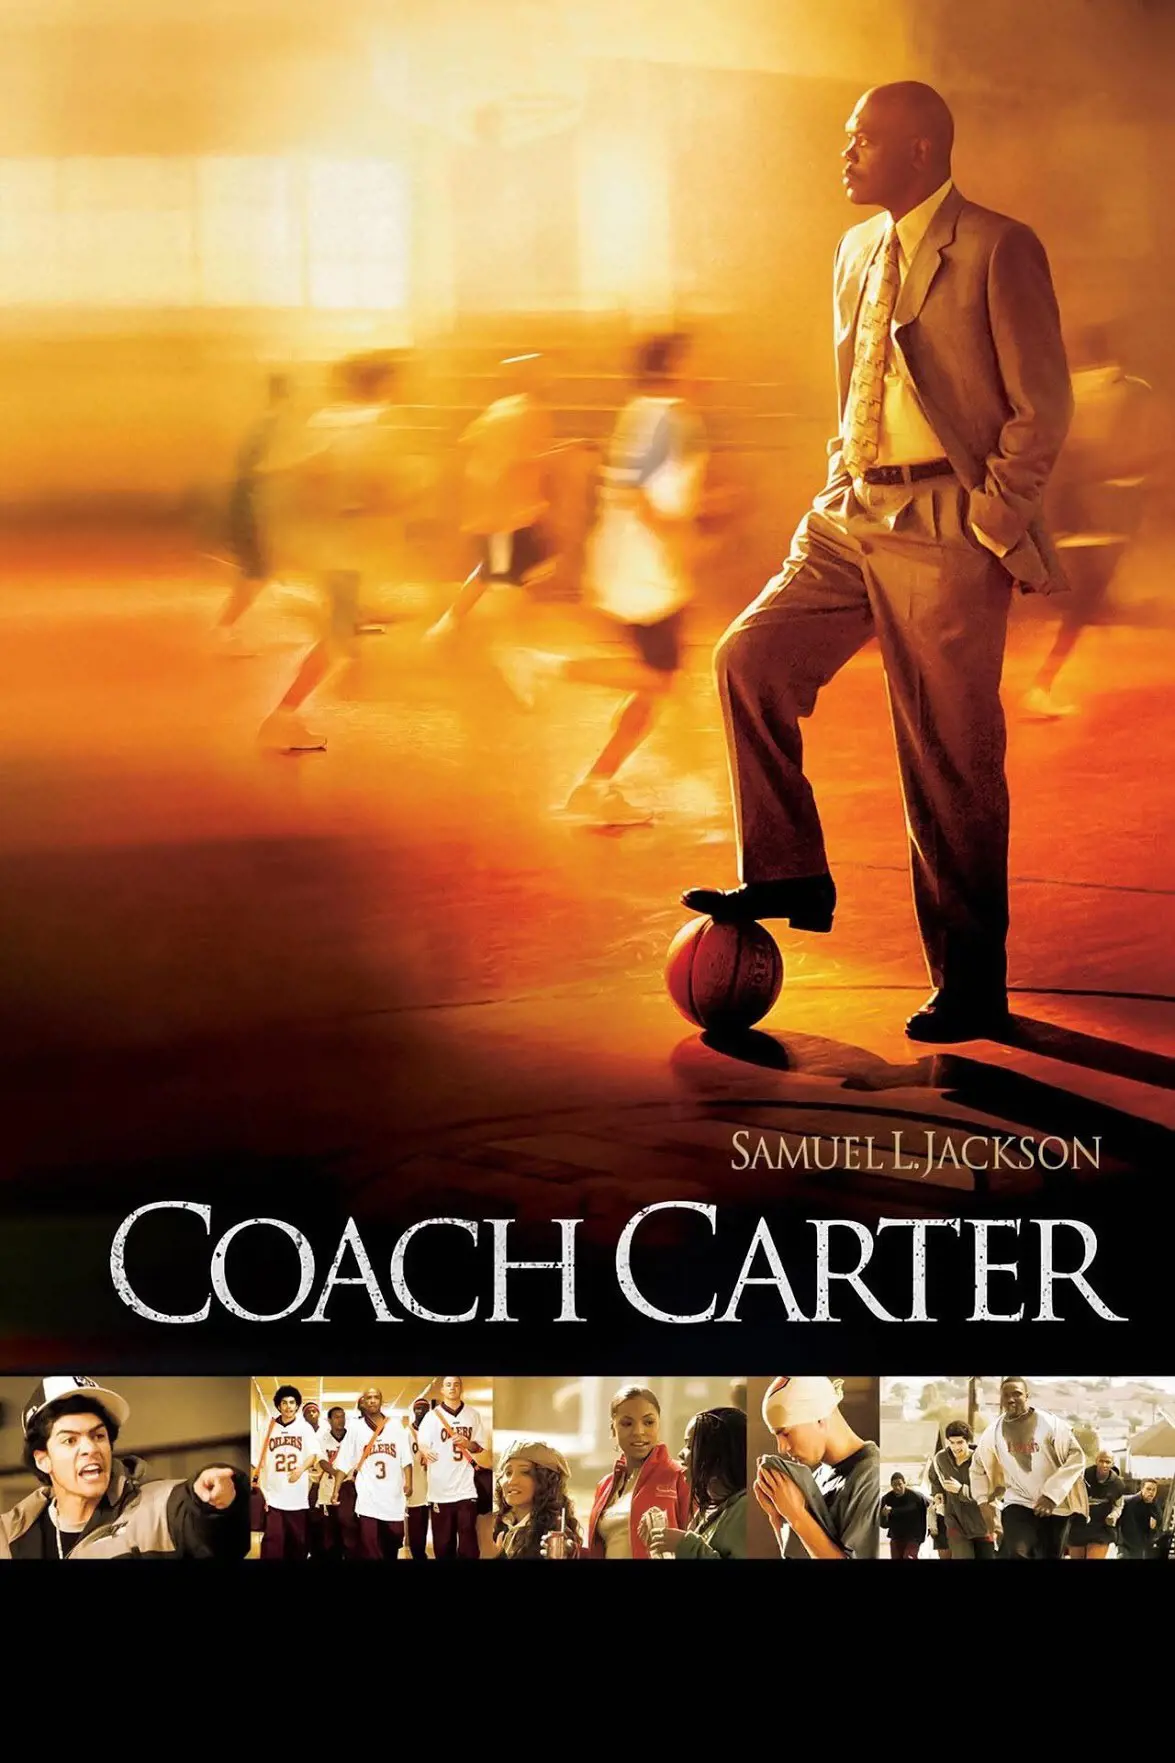 Samuel L. Jackson plays the role of Coach Ken in the picture